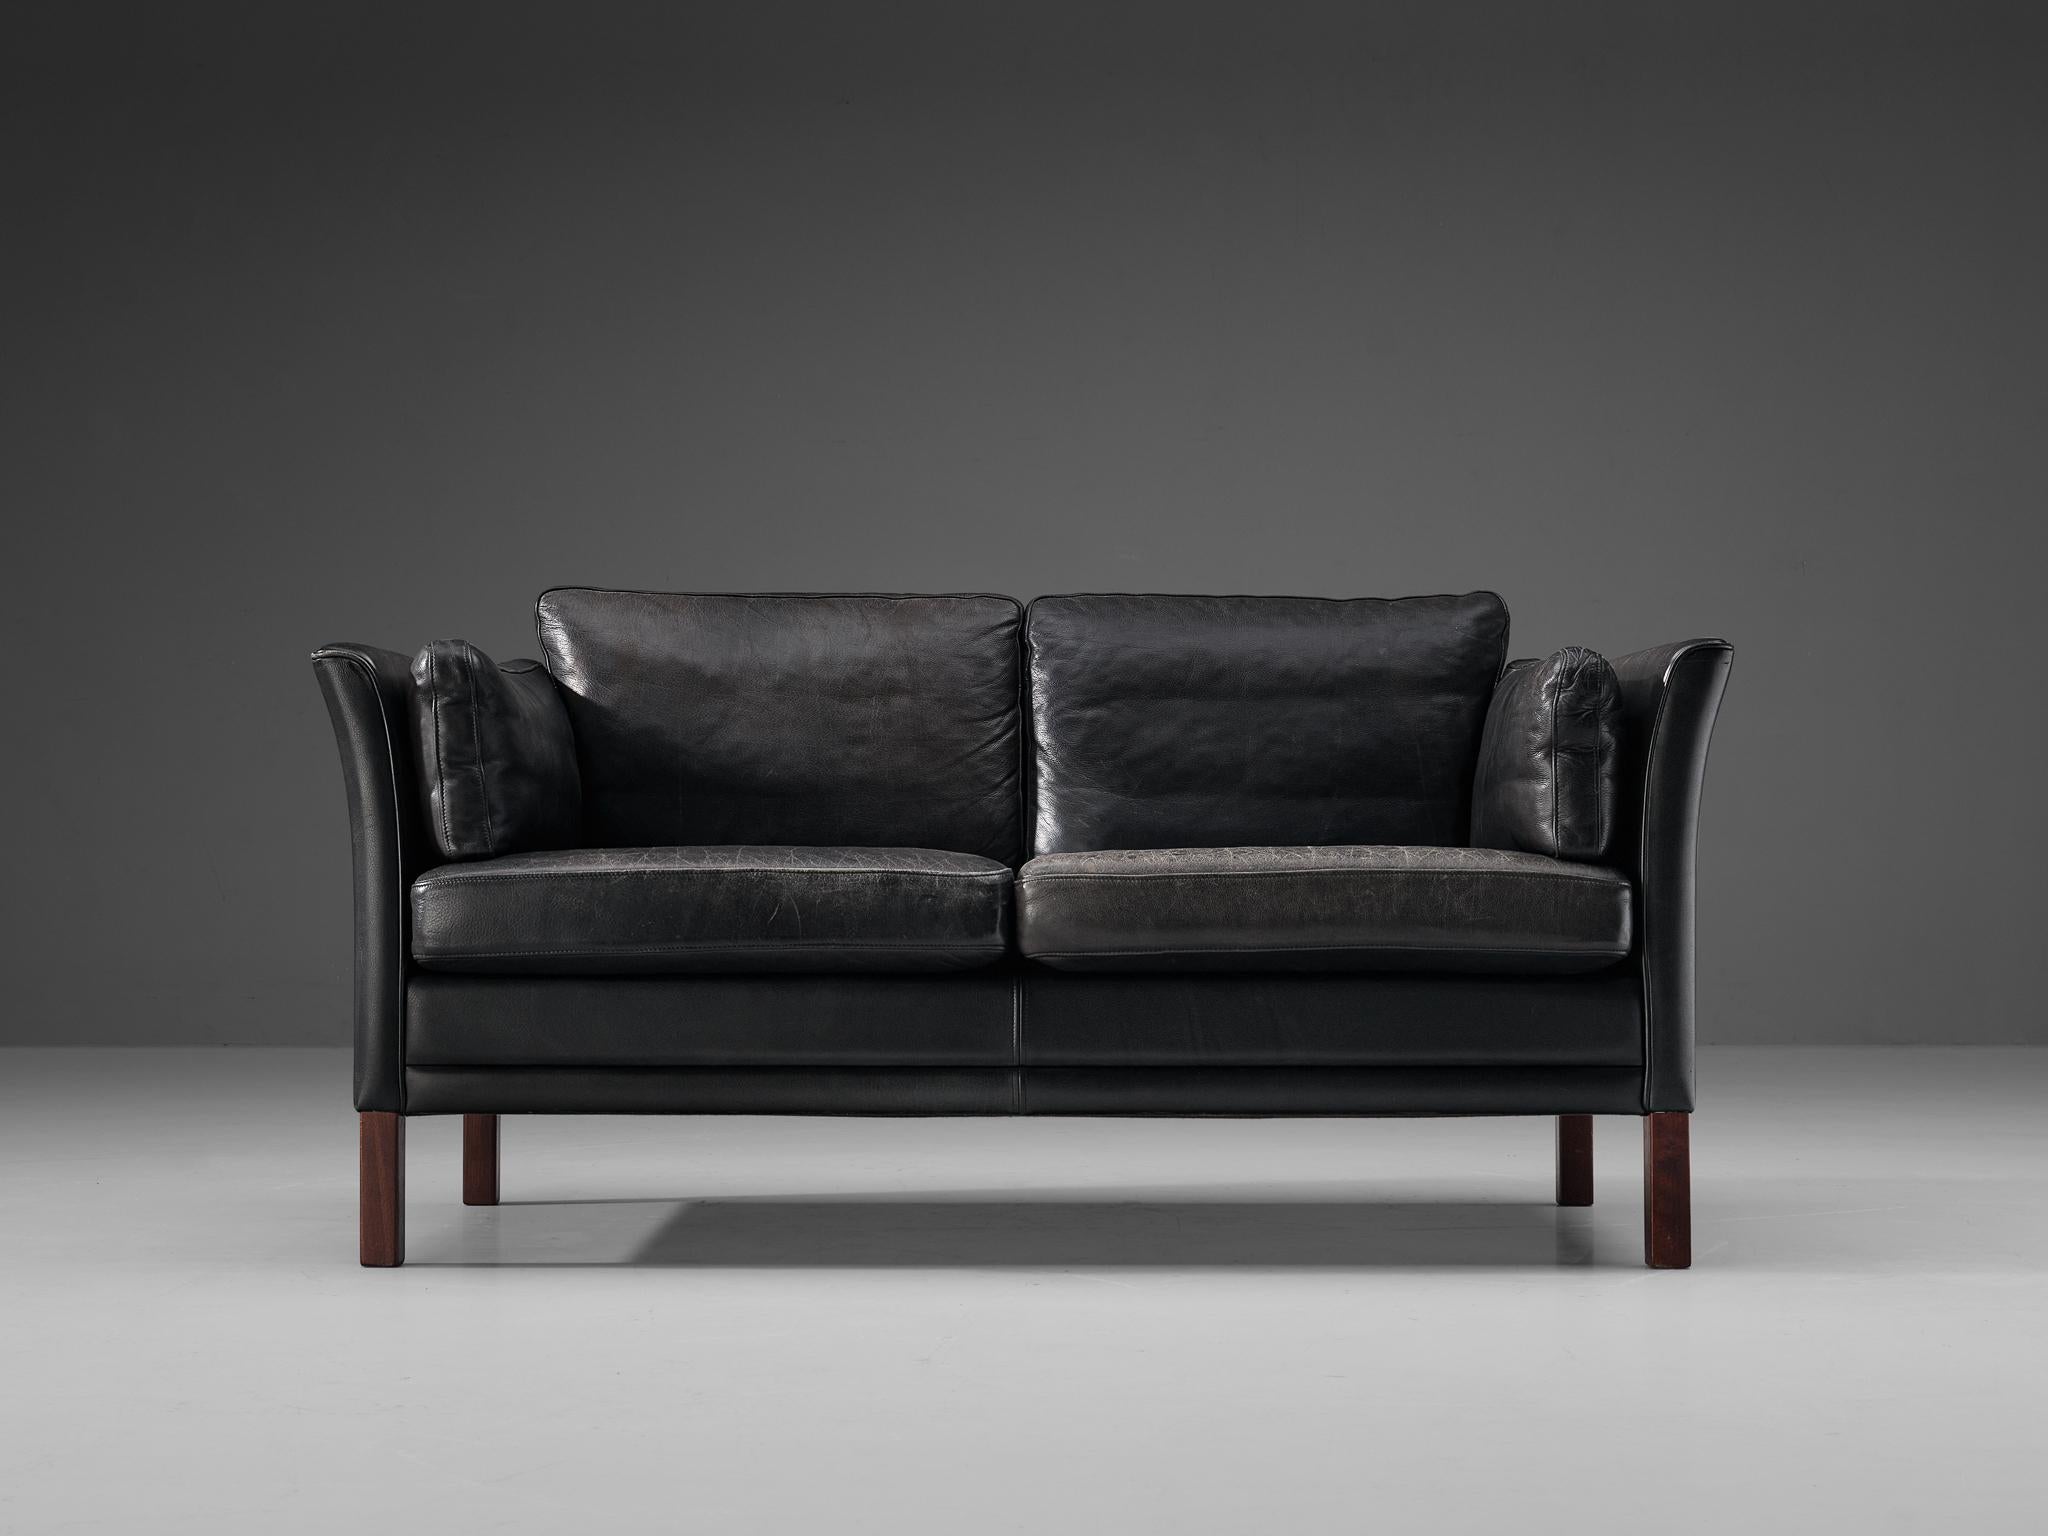 Mogens Hansen, Two-seat sofa model ‘MH2225’, leather, wood, Denmark, 1971

This sofa is produced by the Danish furniture manufacturer Mogens Hansen in 1971. This sofa is characterized by a splendid design that epitomizes a simplistic, natural and